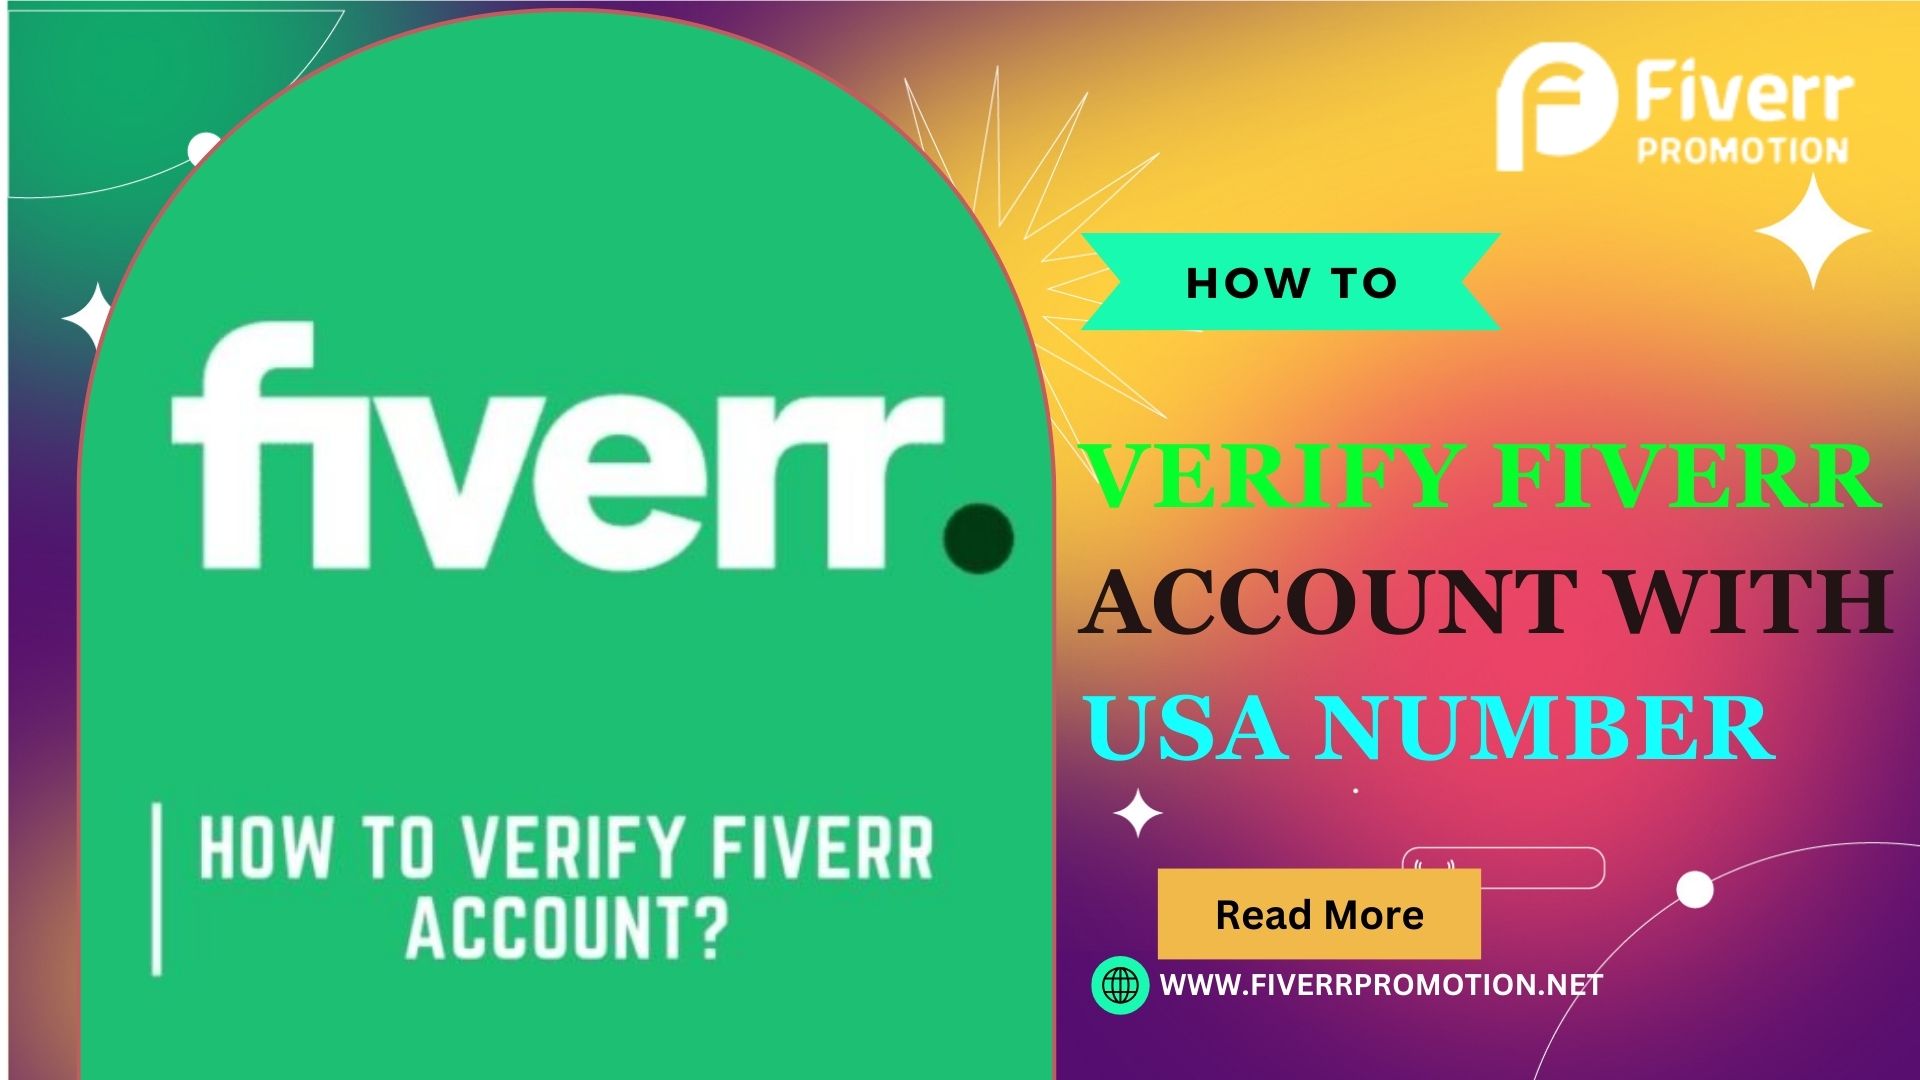 How to Verify Fiverr Account With USA Number